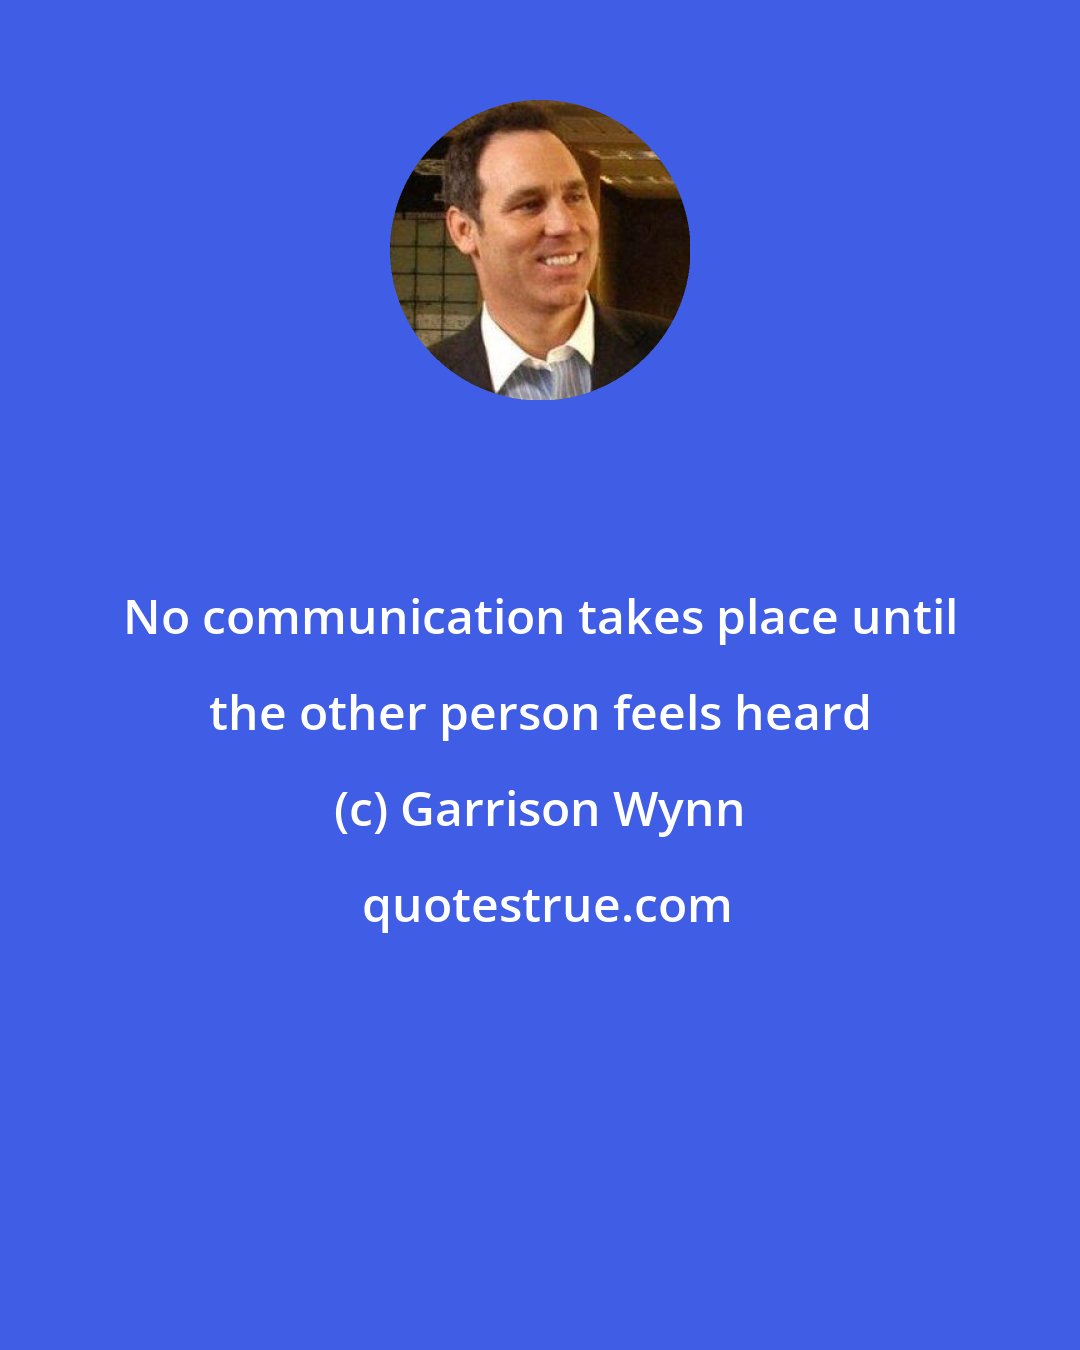 Garrison Wynn: No communication takes place until the other person feels heard